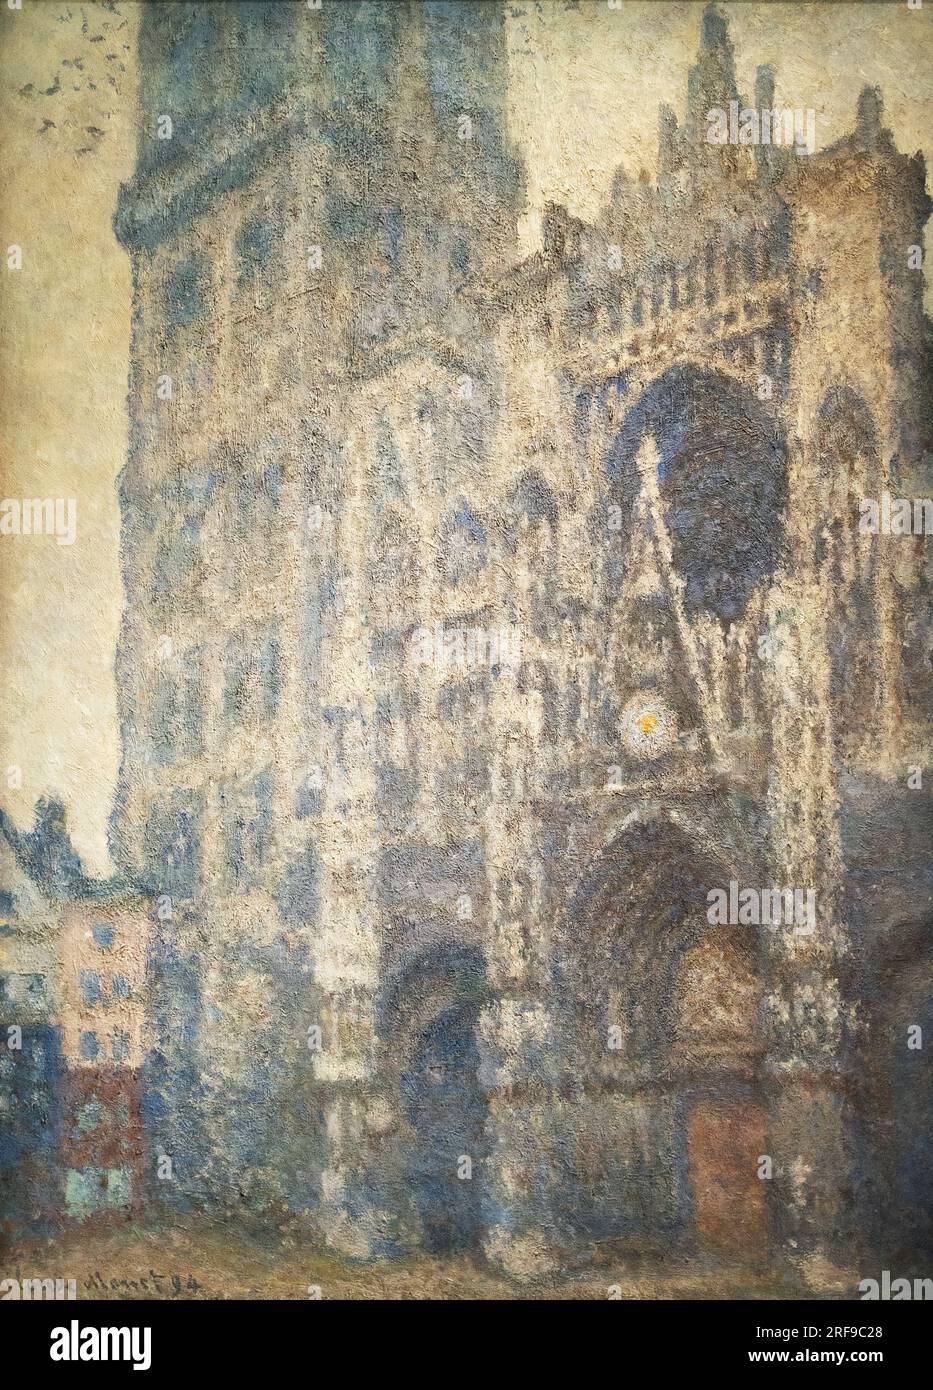 Claude Monet painting, Rouen Cathedral facade and entrance in Bad Weather, 1892; 19th century French impressionist painter. Stock Photo